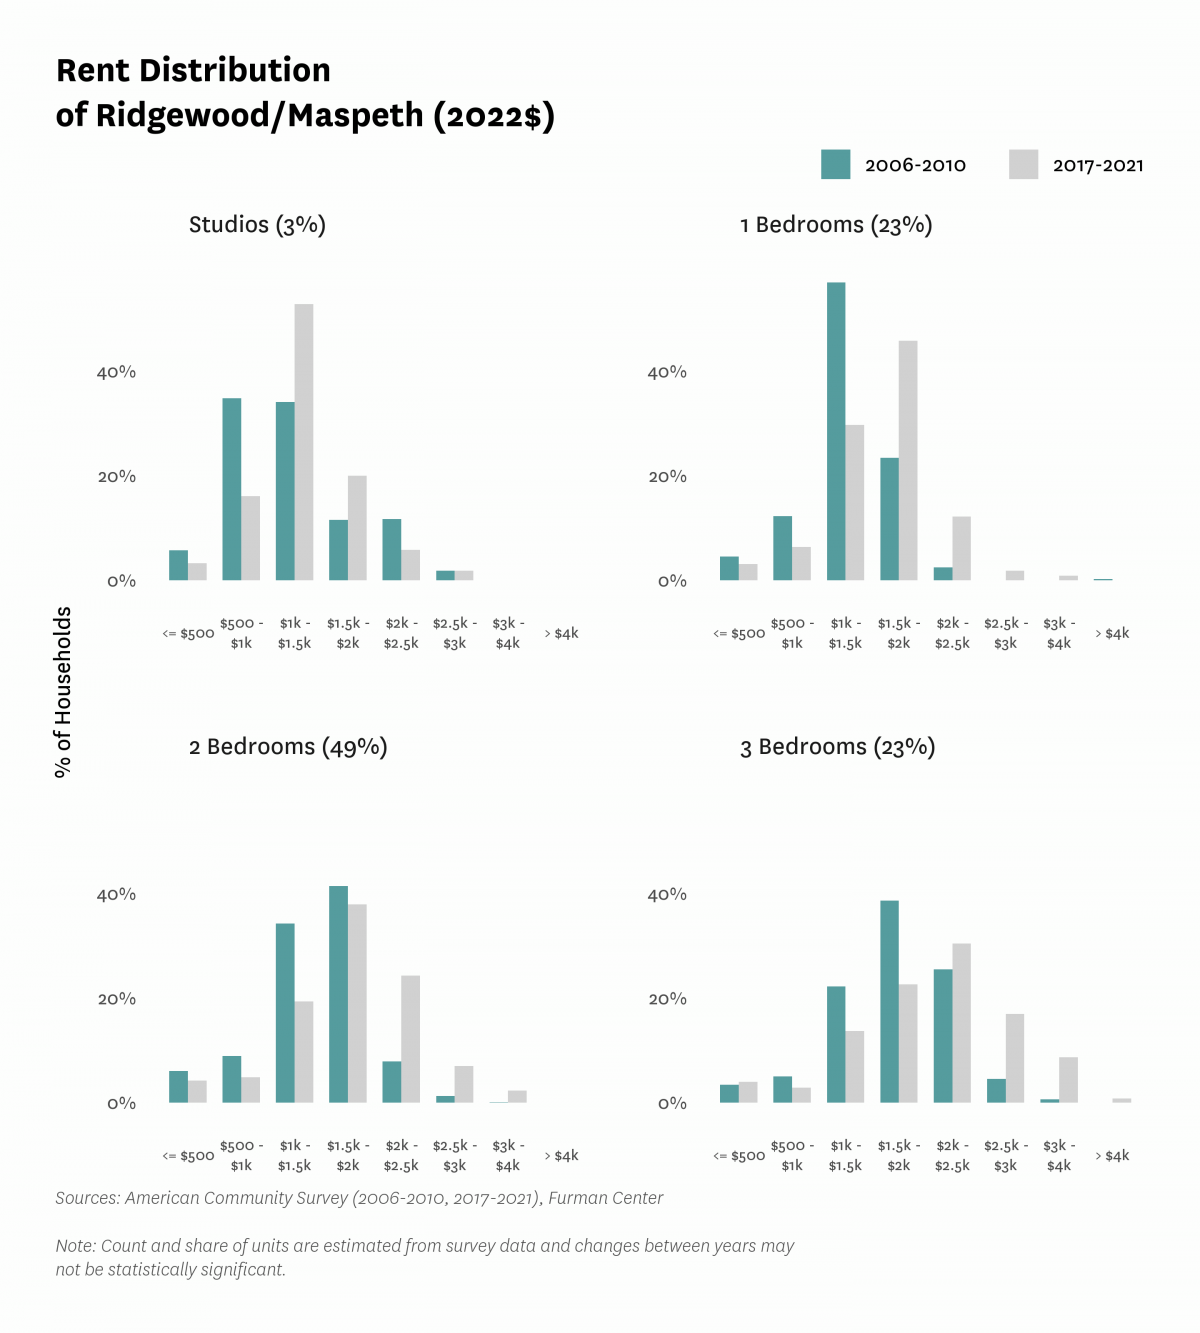 Graph showing the distribution of rents in Ridgewood/Maspeth in both 2010 and 2017-2021.